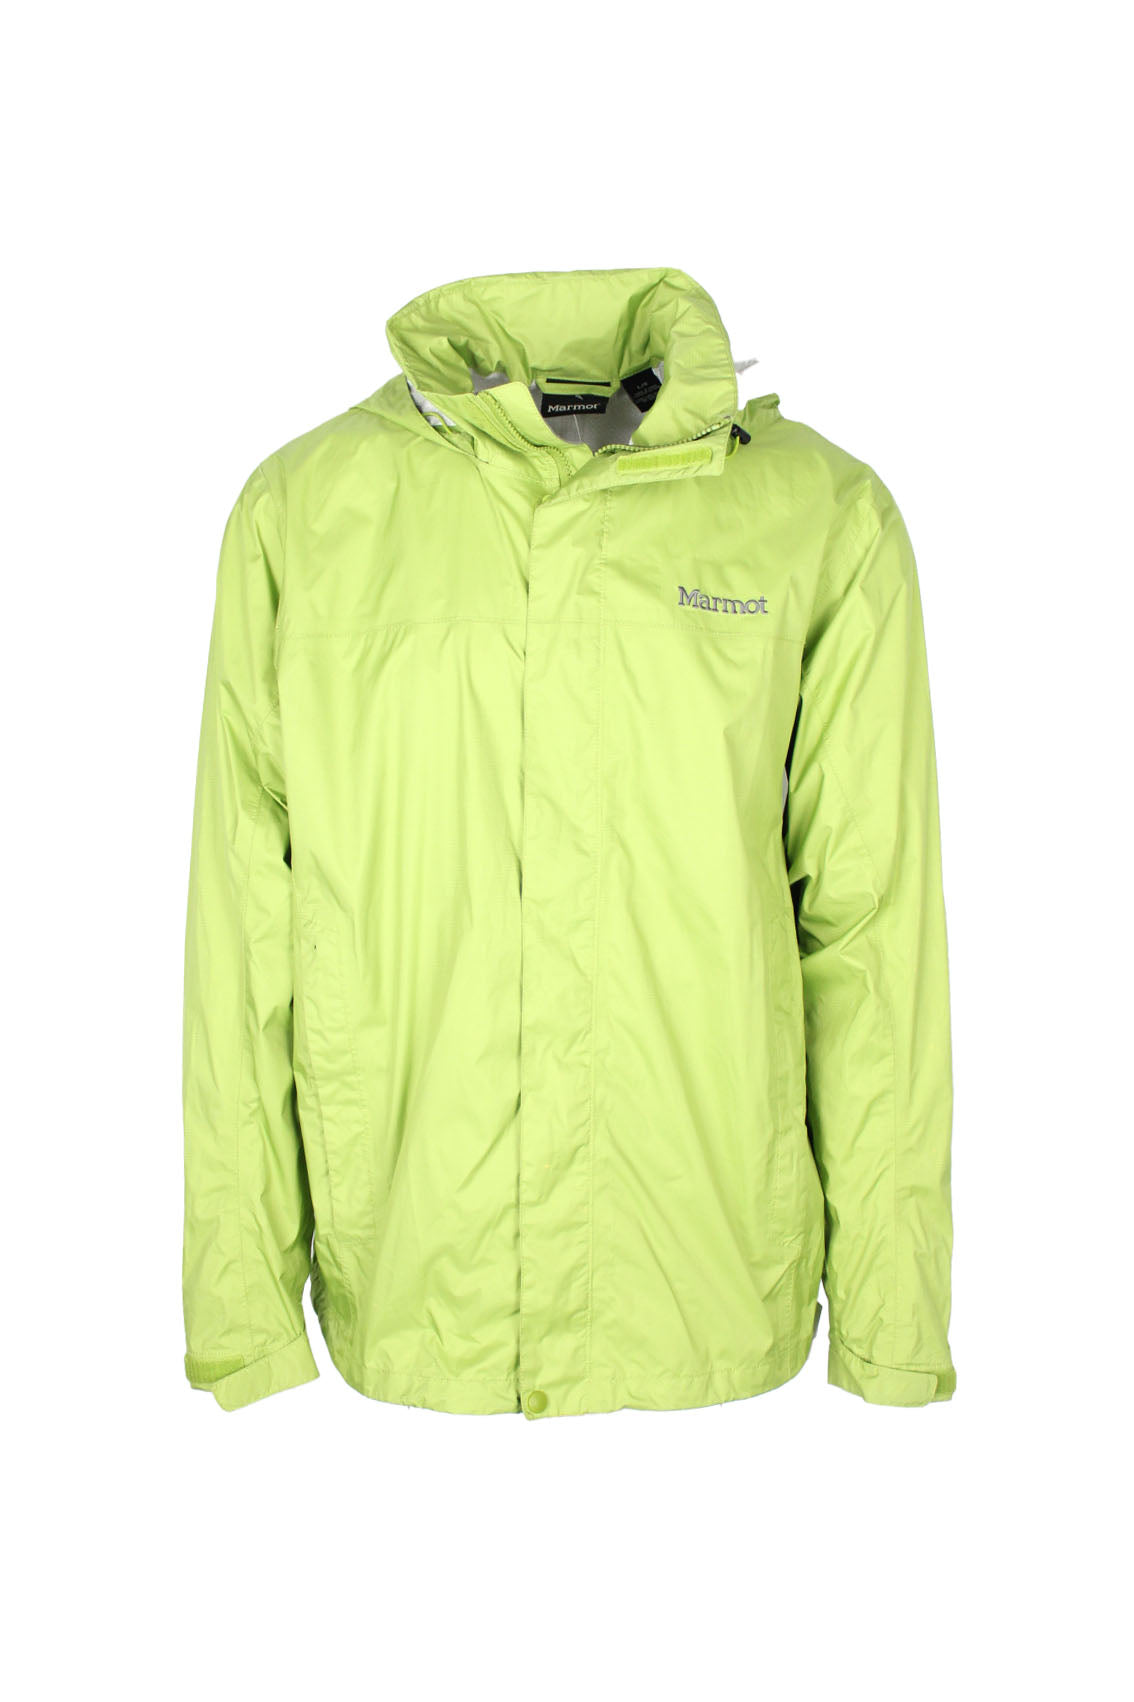 front view of marmot lime green velcro/zip up ripstop waterproof jacket. features ‘marmot’ logo embroidered at left breast/back right shoulder, side zip hand pockets, velcro straps at cuffs,underarm zip vents, and elastic drawstring at hood/hem.